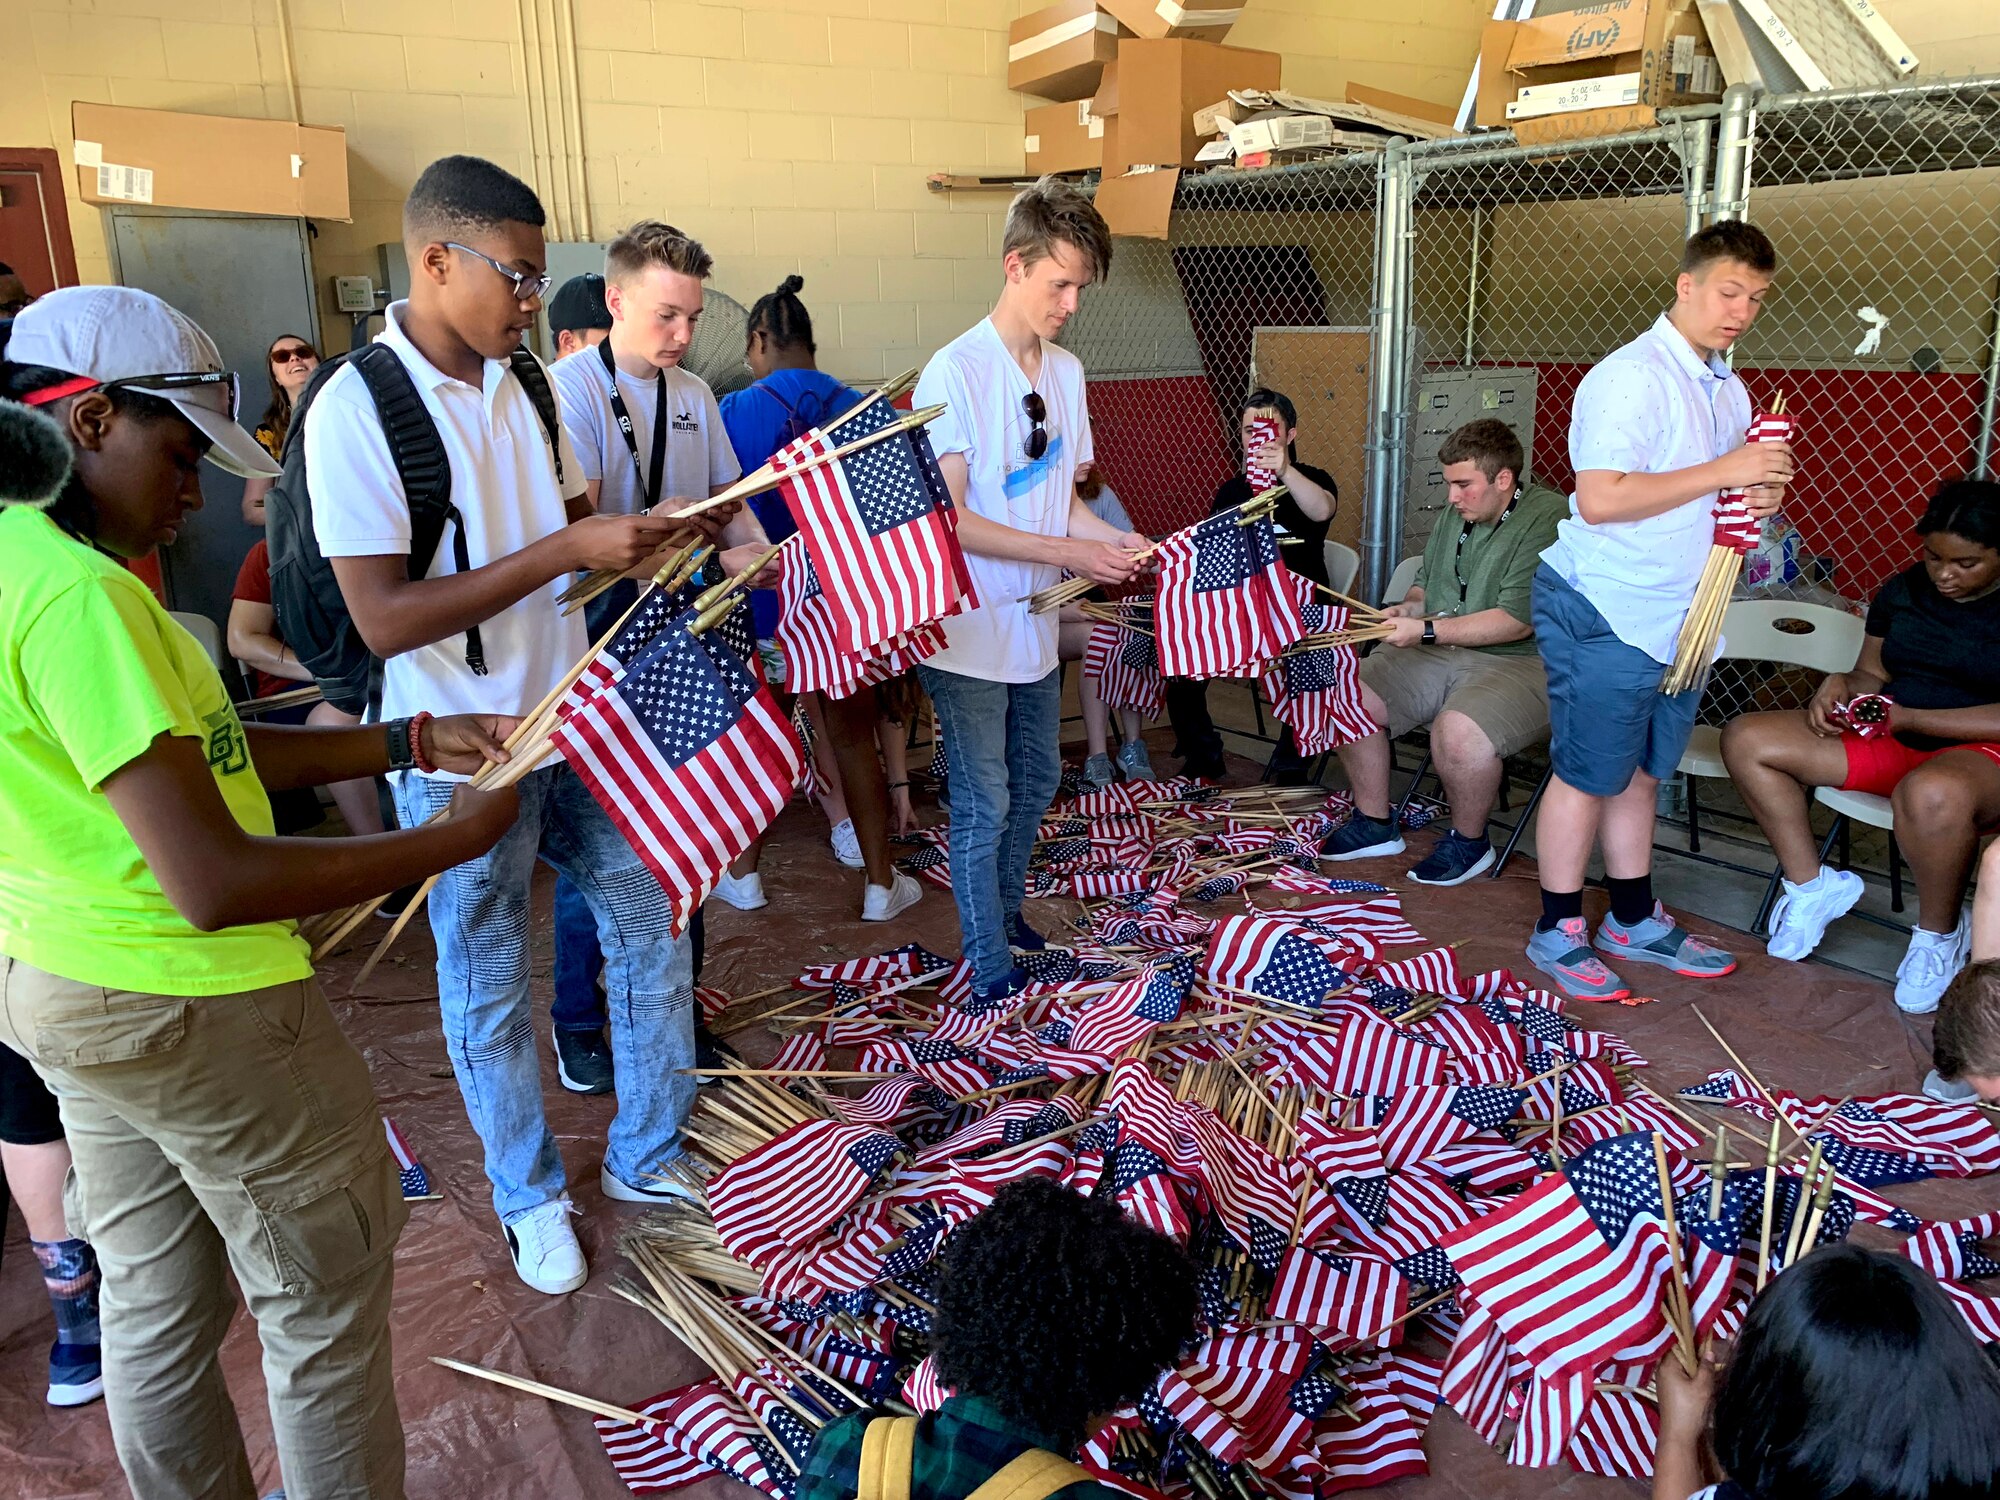 Attendees of the 2019 Youth of the Year Summit gather, roll and store American flags at the Fort Sam Houston Cemetery, San Antonio, June 19, 2019. During their week in Texas, about 60 teens from across the Air Force took part in a variety of activities focused on teambuilding, leadership, community service and personal growth. The week culminates June 20 when the Air Force Youth of the Year will be named. The winner goes on to compete for Military Youth of the Year in September. The Air Force, through the Air Force Services Center, partners with the Boys and Girls Clubs of America to offer the Youth of the Year program. (U.S. Air Force photo by Debbie Aragon)